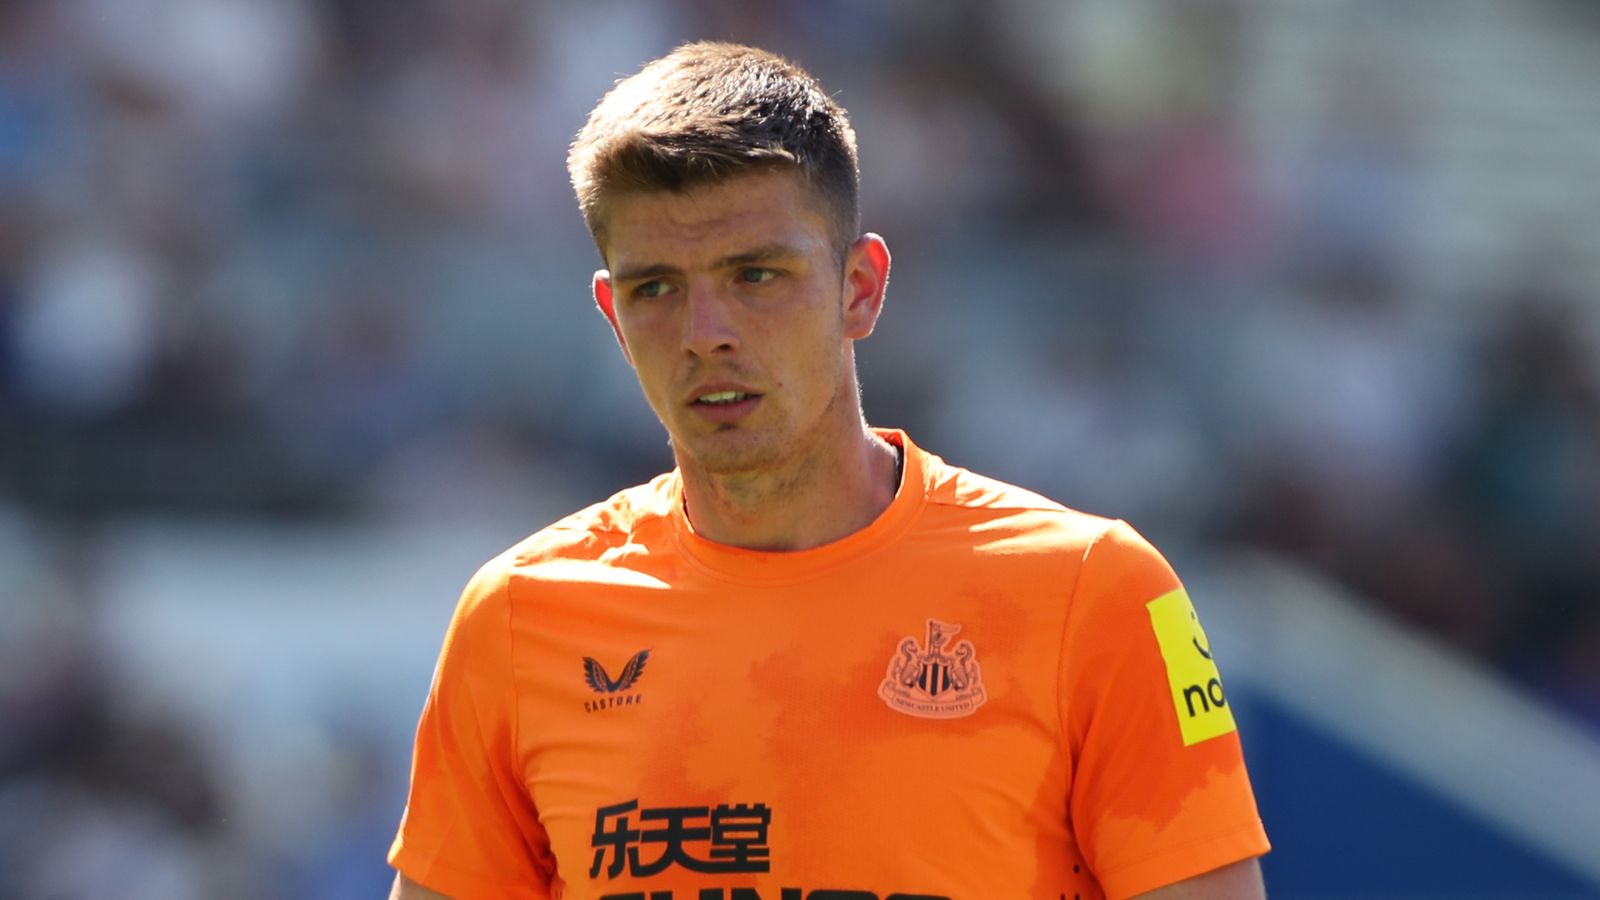 nick-pope-exclusive-interview-newcastle-goalkeeper-discusses-his-new-club-england-hopes-and-burger-king-fame